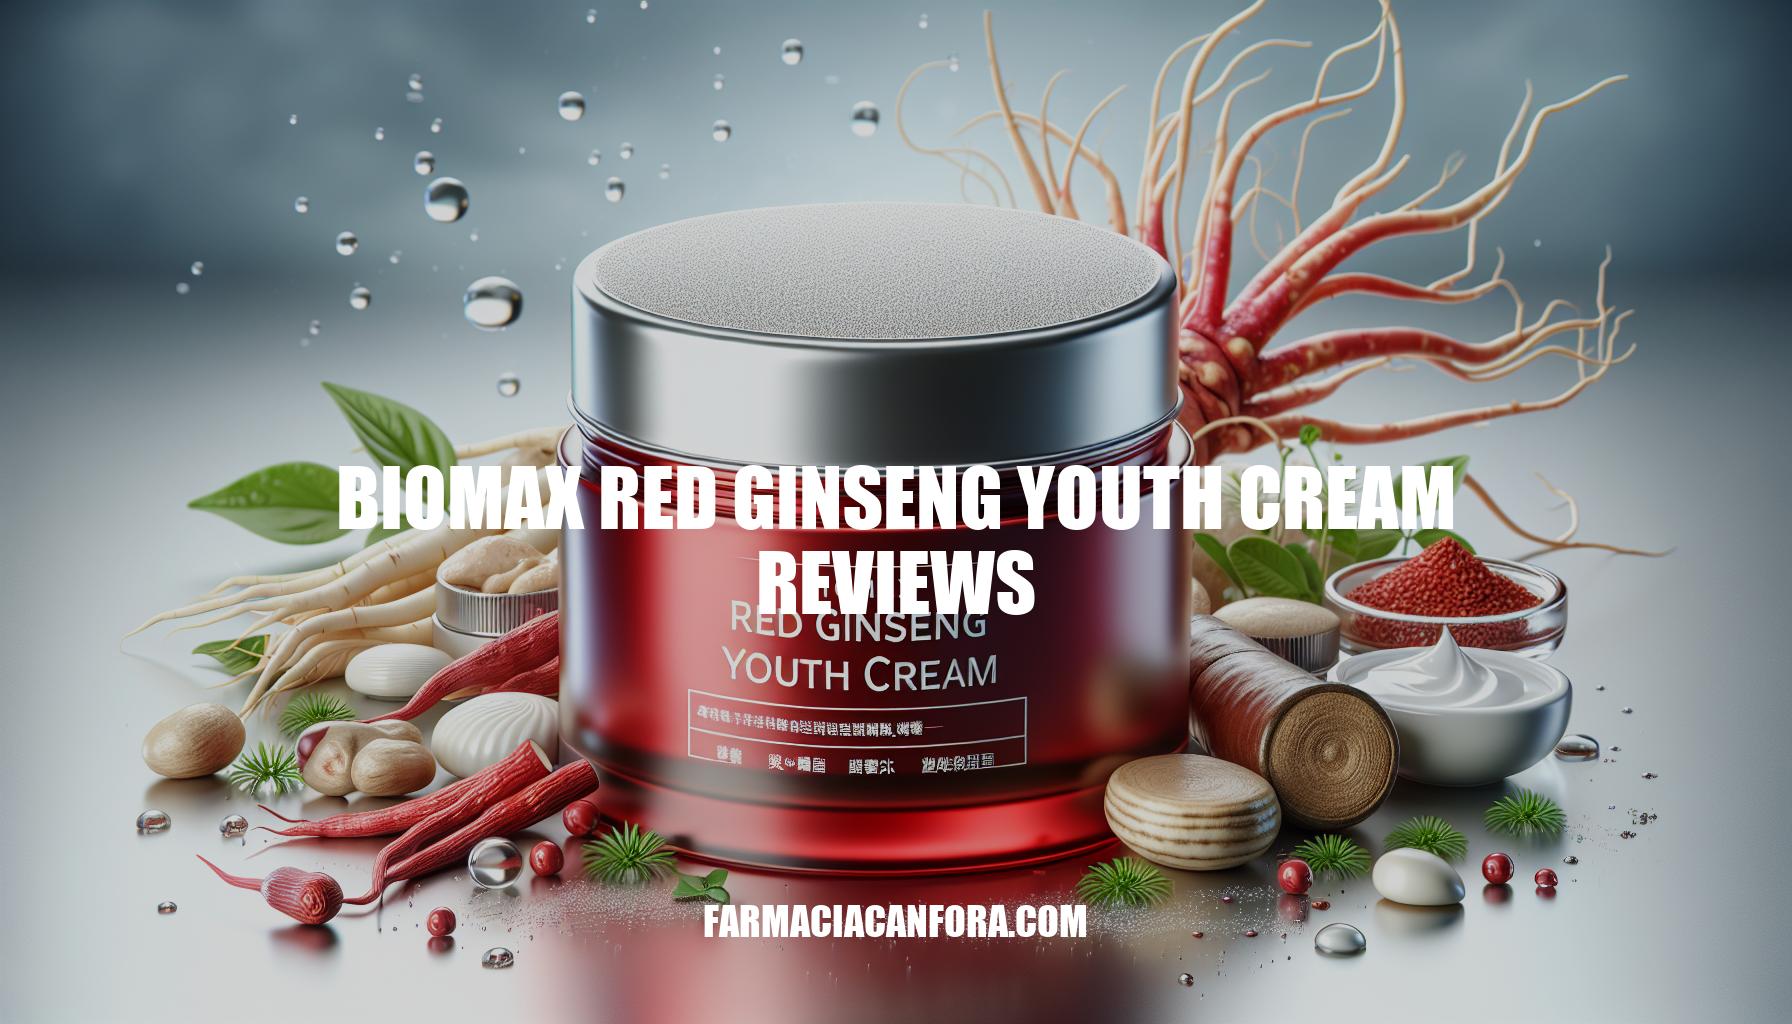 Biomax Red Ginseng Youth Cream Reviews: Expert Insights